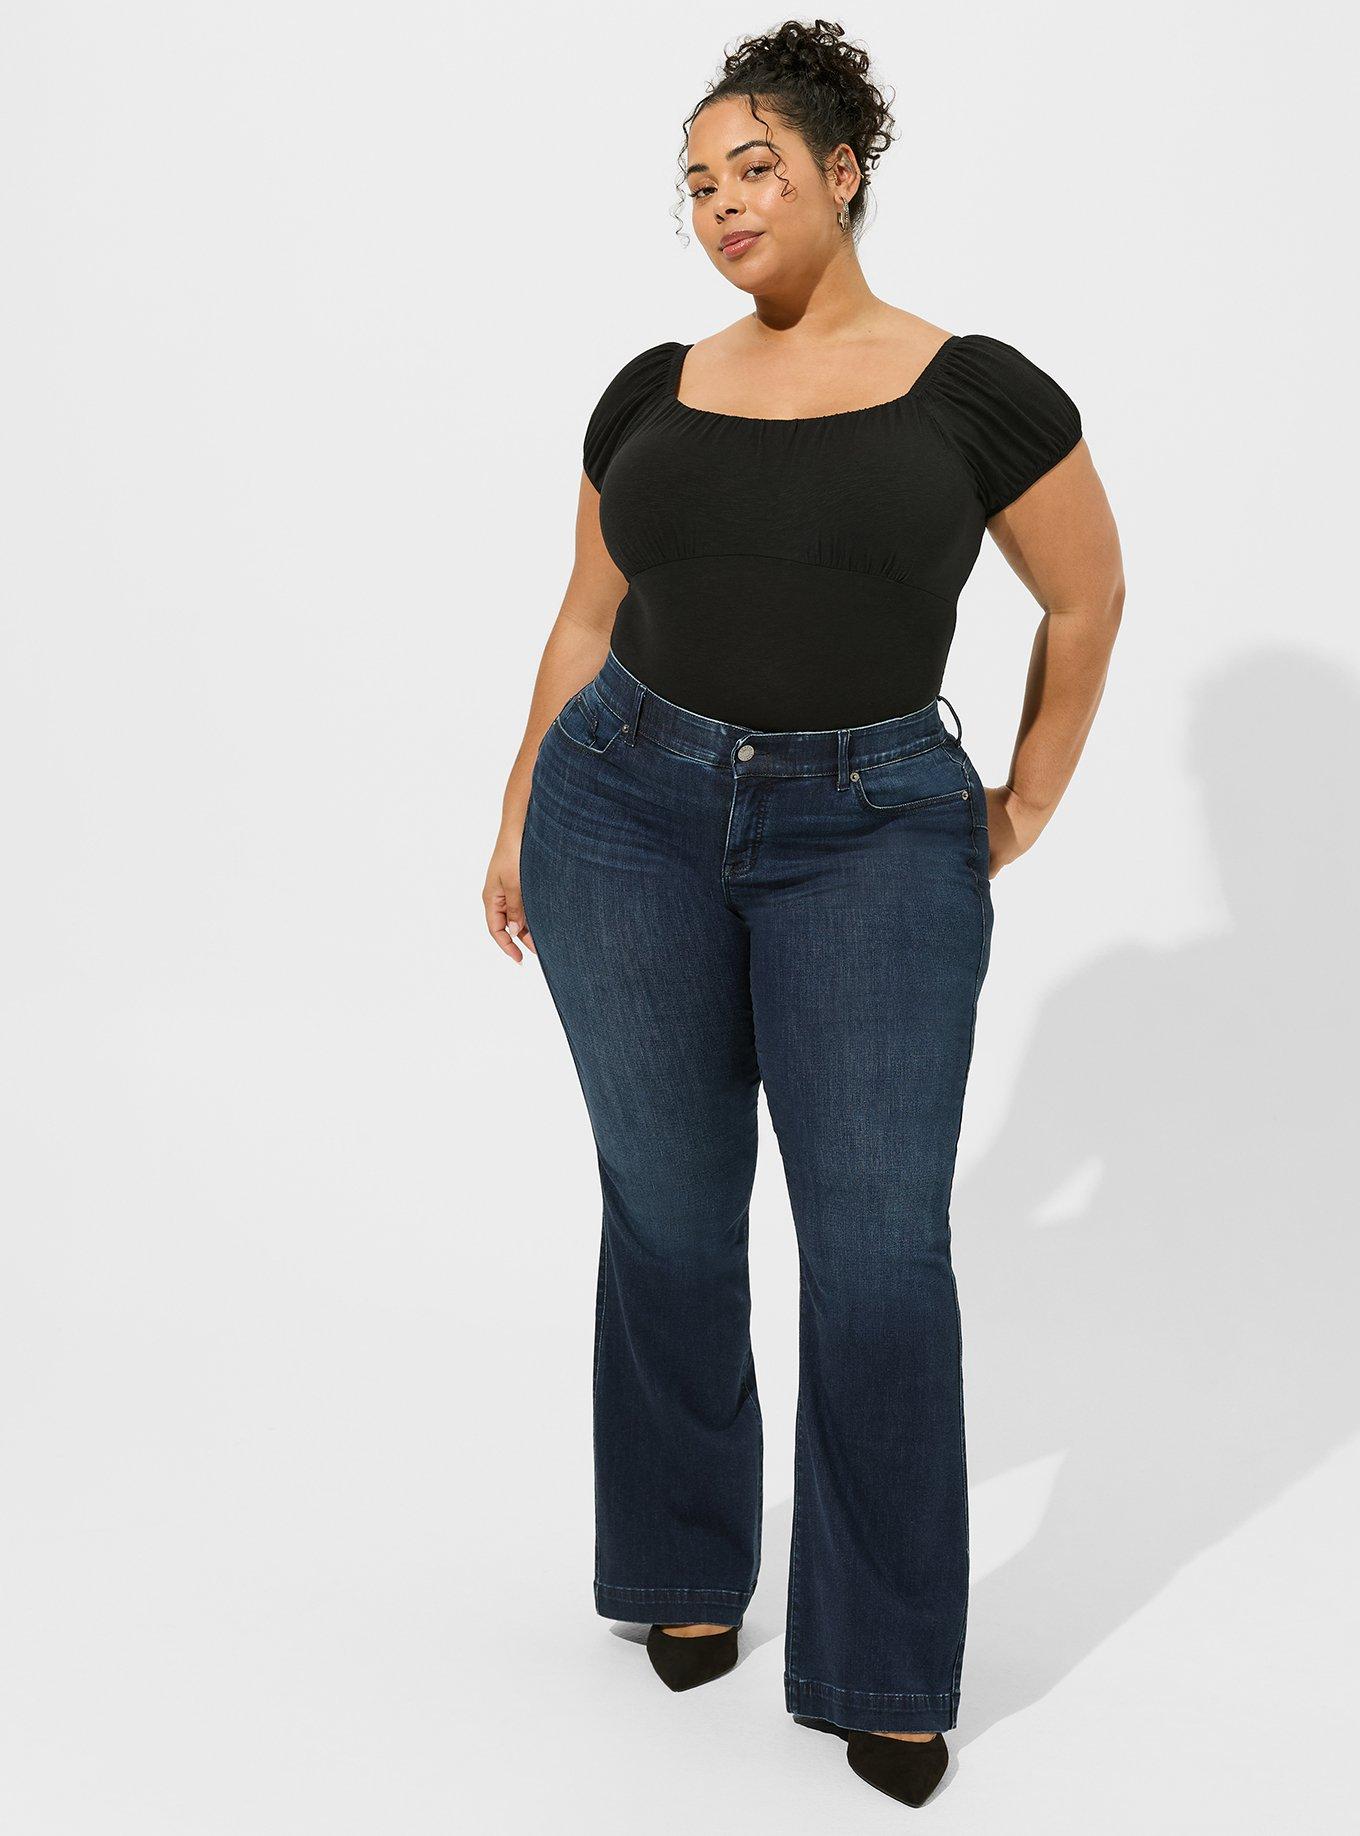 Tight Plus Size Scoop Neck Tops & T-Shirts.